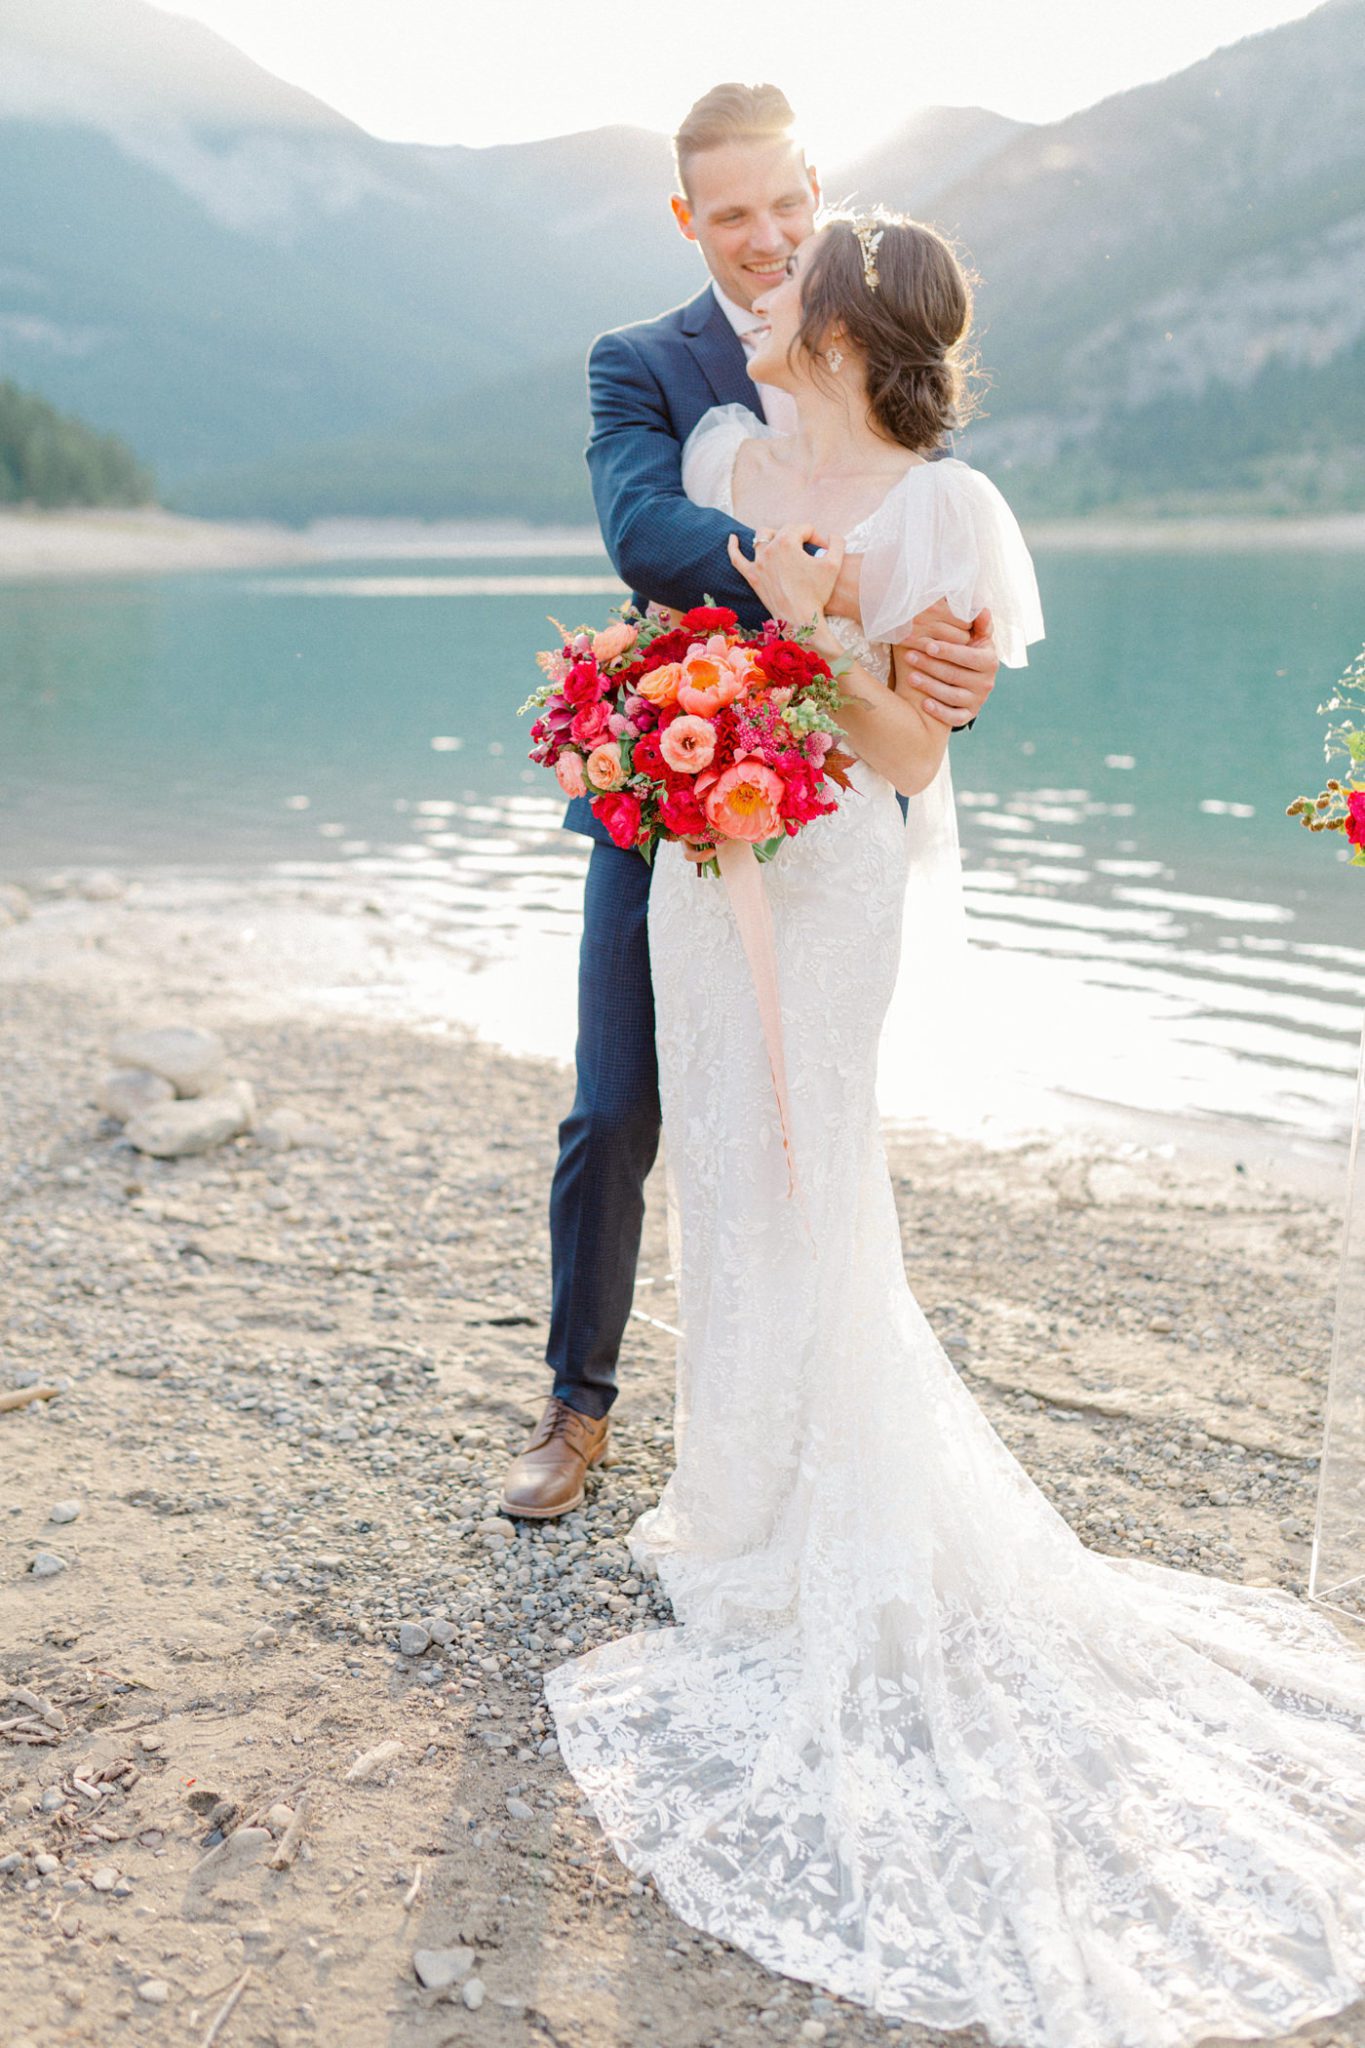 The Dreamiest Lakeside Wedding Inspiration with Vibrant Florals and Picturesque Mountain Views